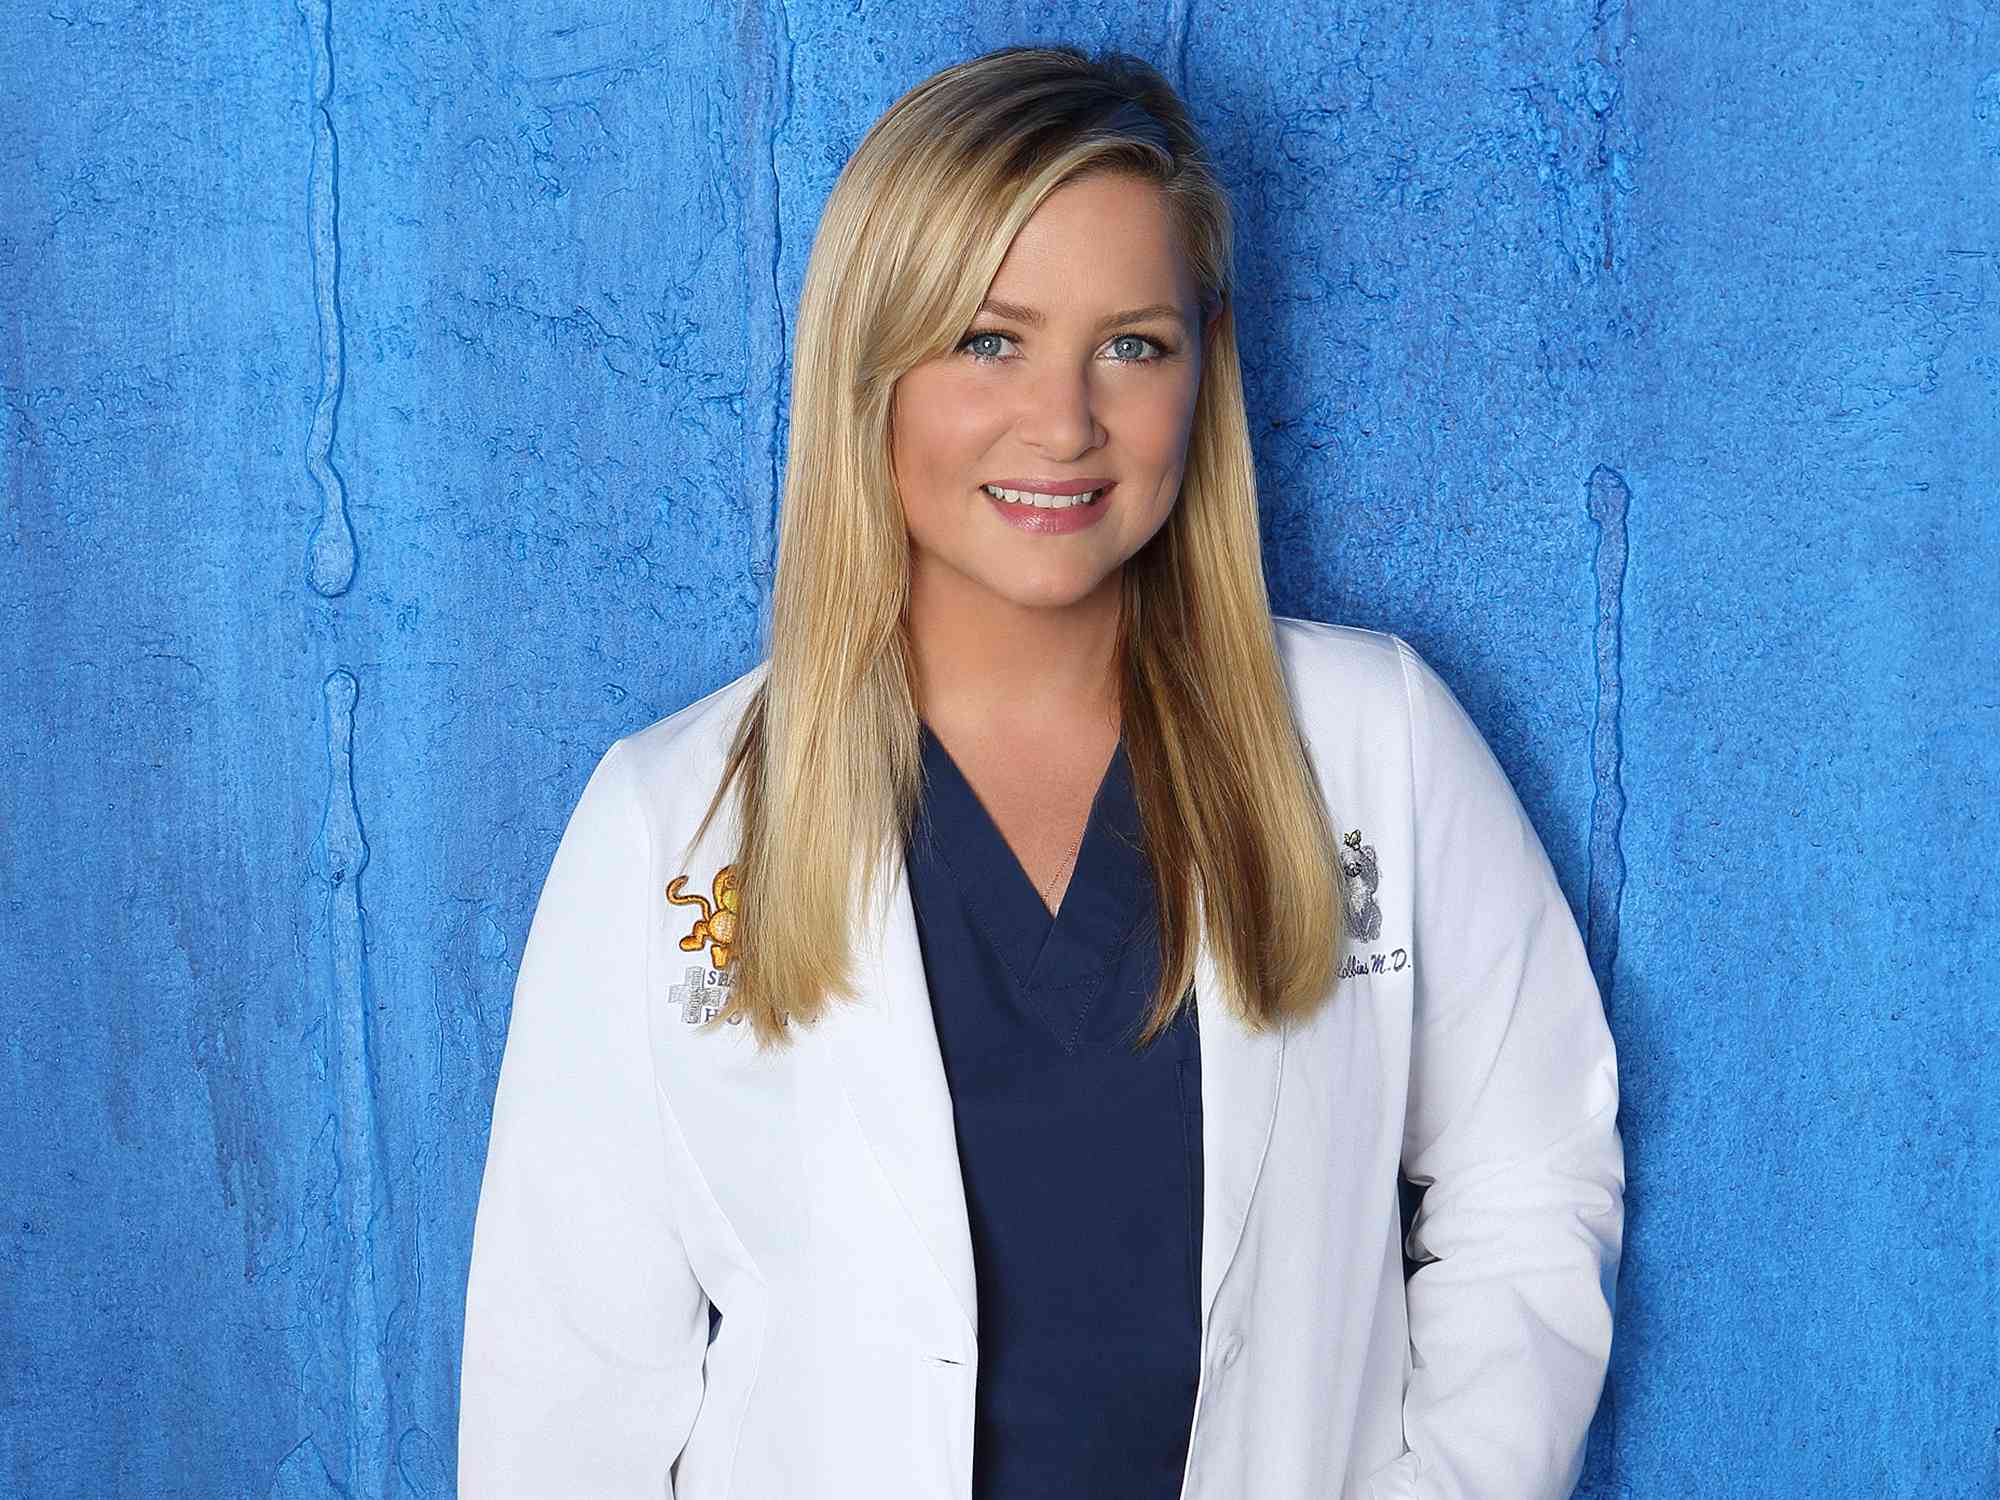 paging jessica capshaw! “grey's anatomy” season 20 will see the return of dr. arizona robbins among new faces